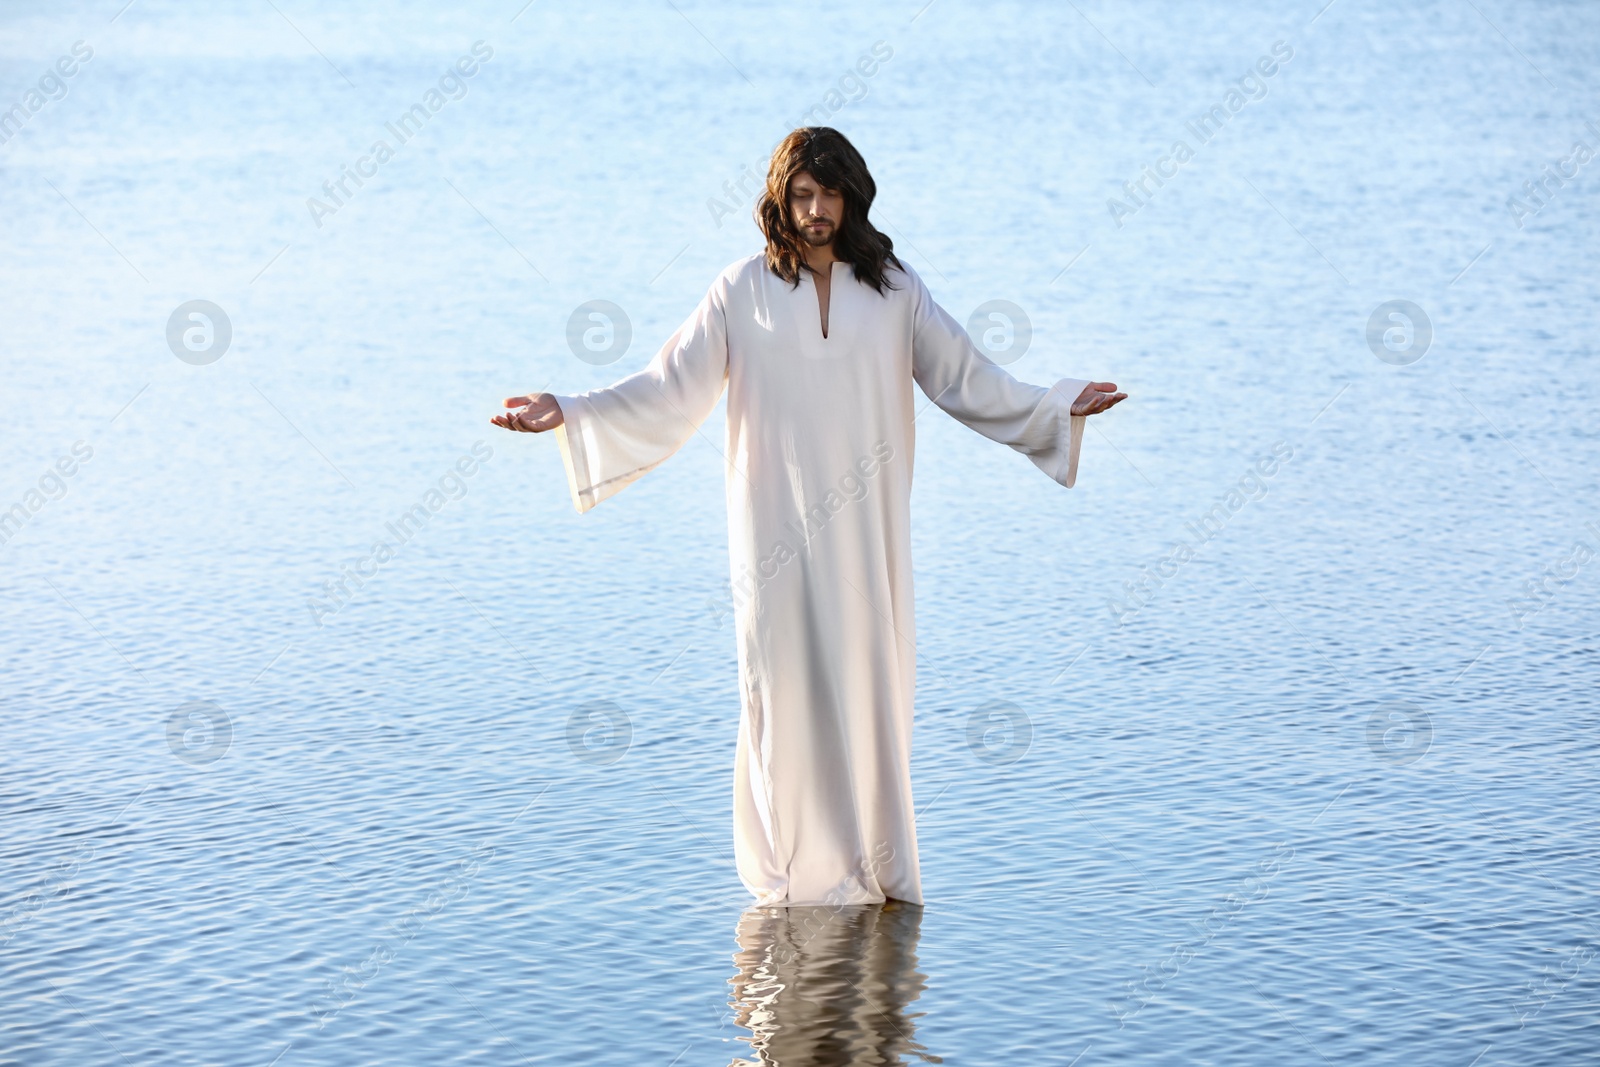 Photo of Jesus Christ in water lit by morning sun